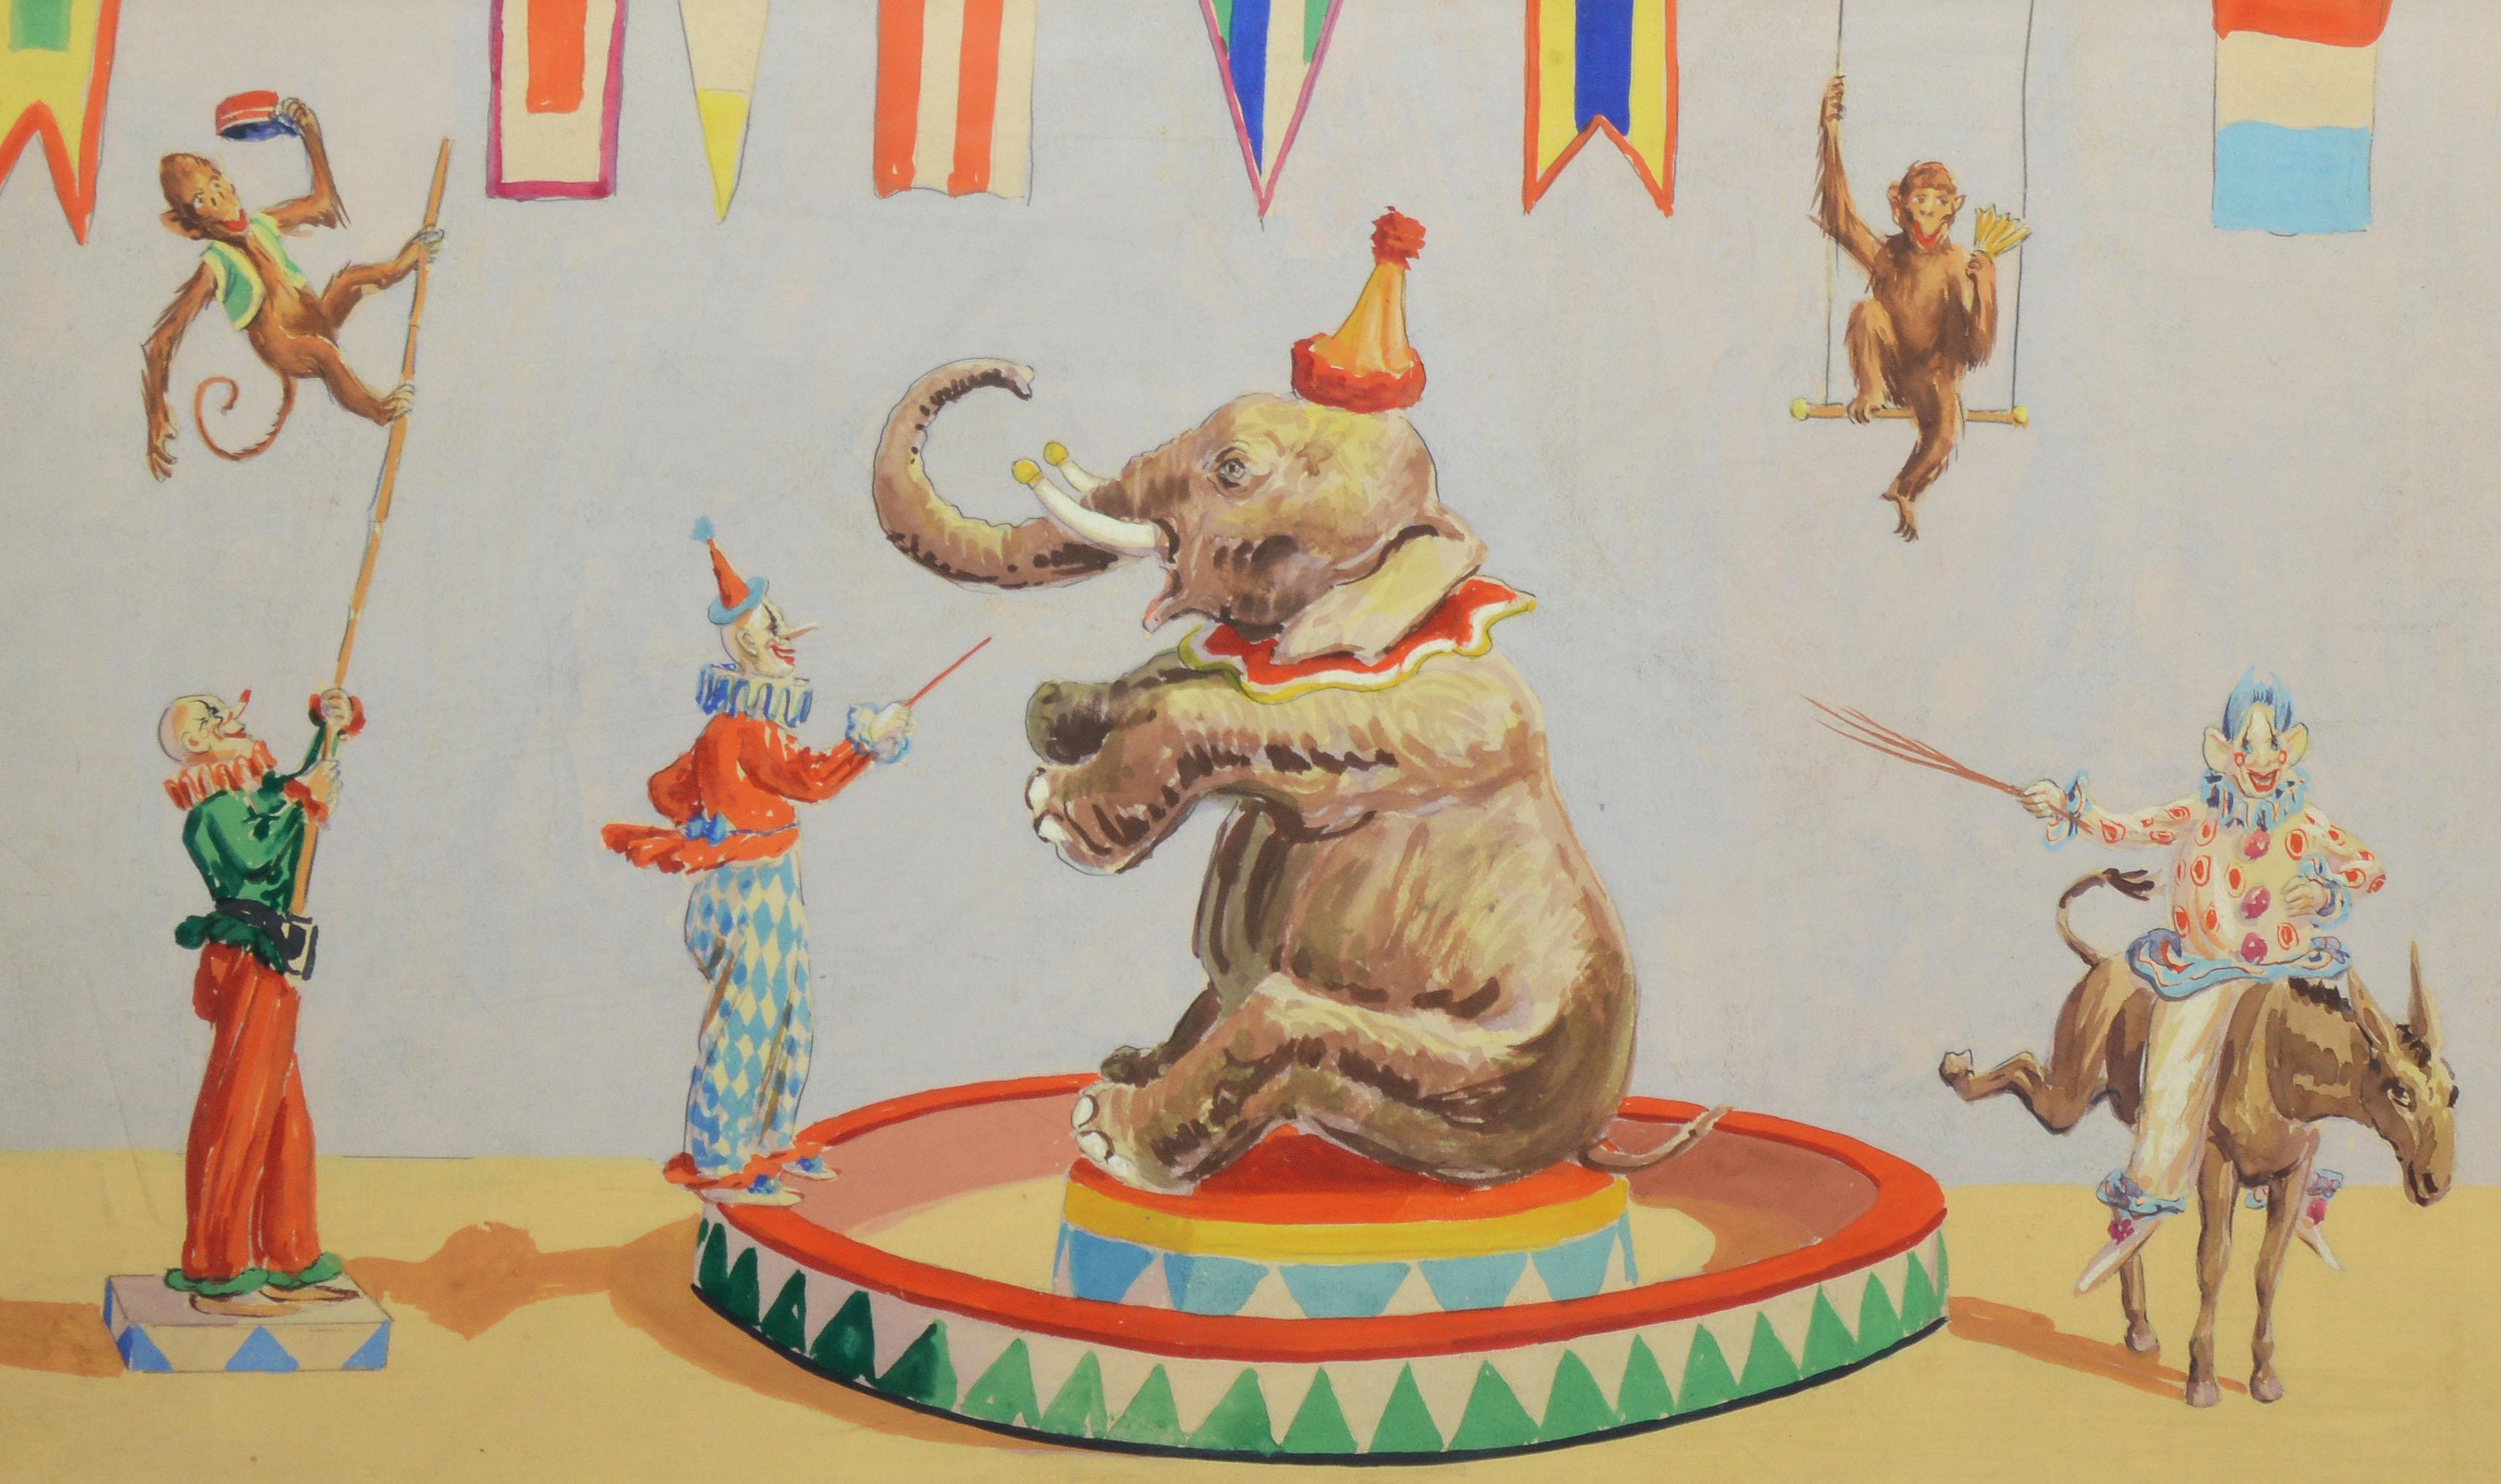 Antique Circus Painting with Elephants and Monkeys  - Beige Figurative Painting by Unknown